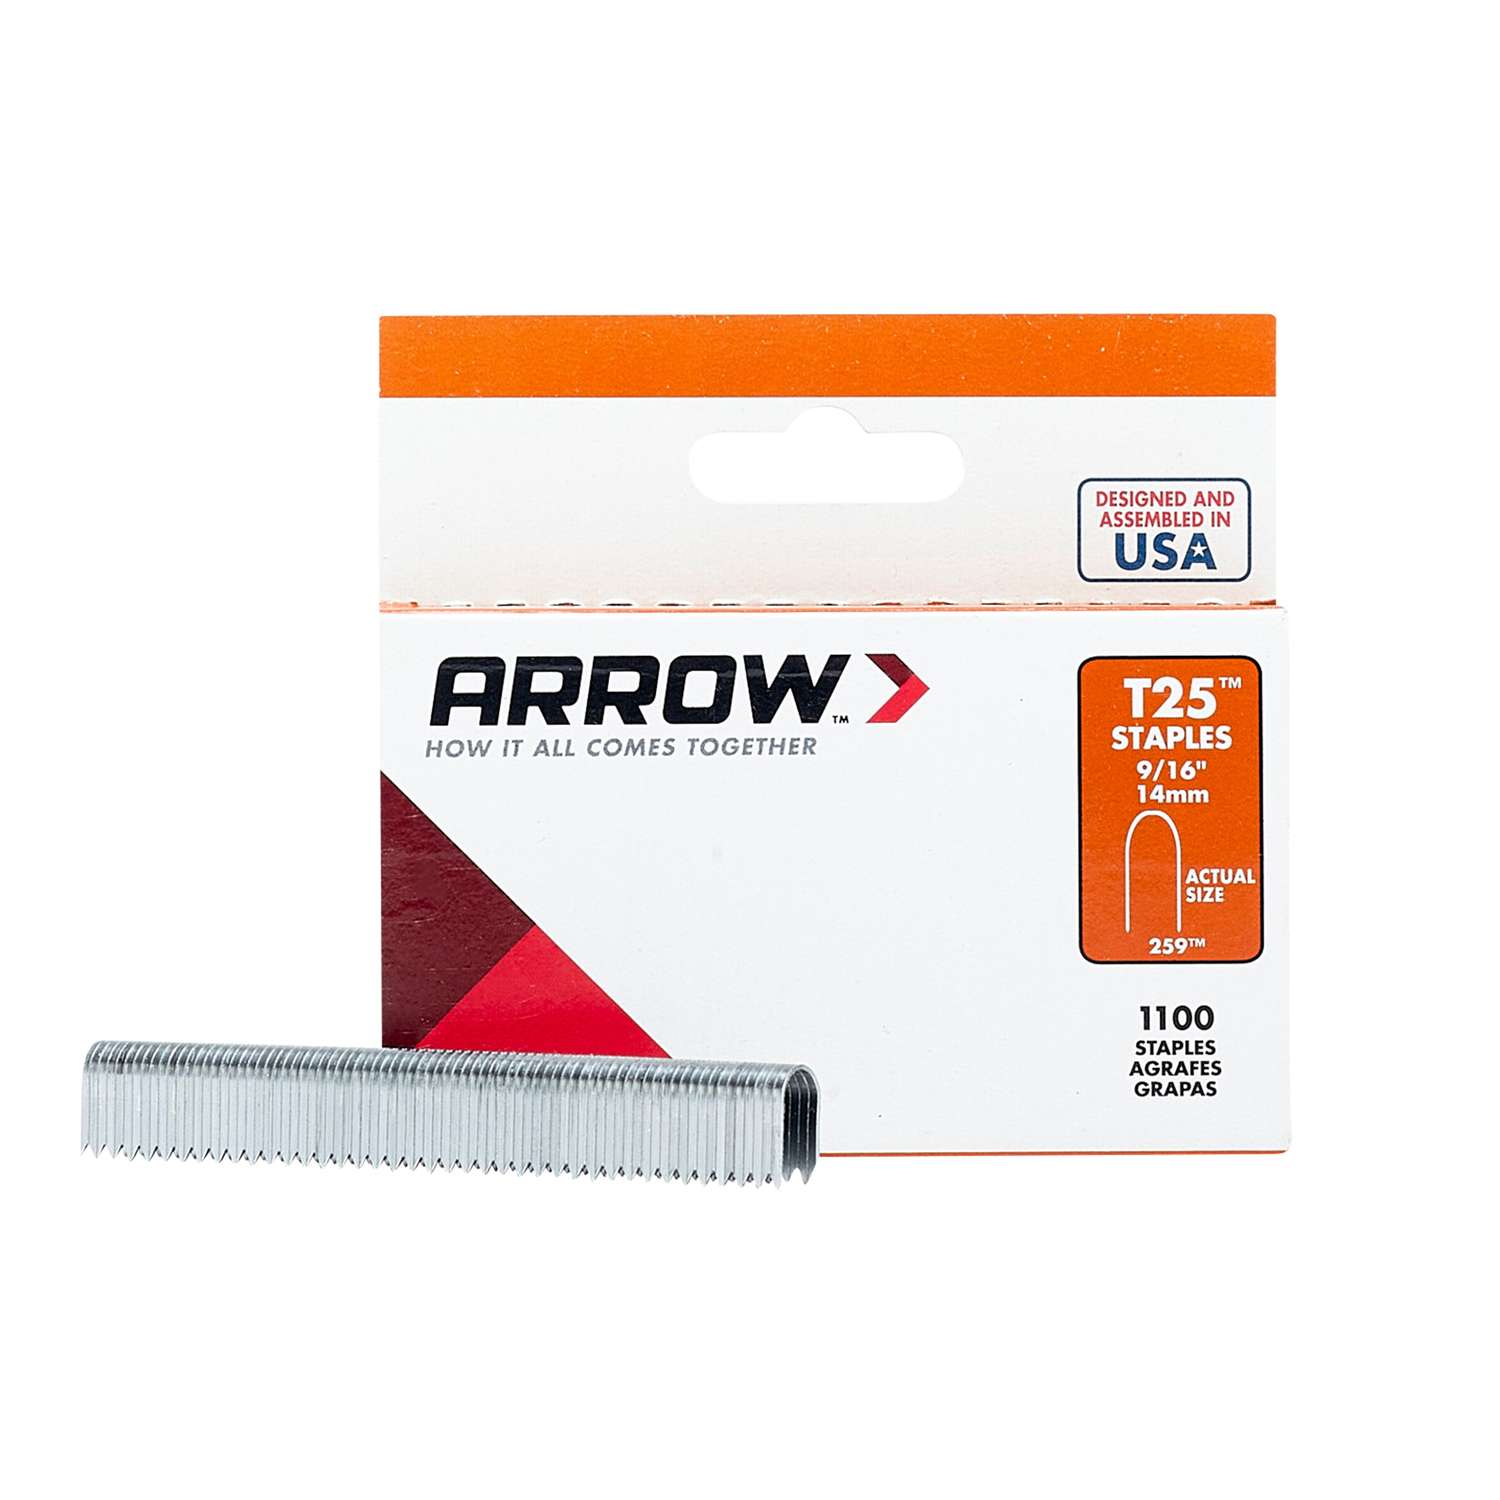 10 mm New! Round Crown Staples 1000-Pack BOX OF 1000 Arrow #256 T25 3/8" 